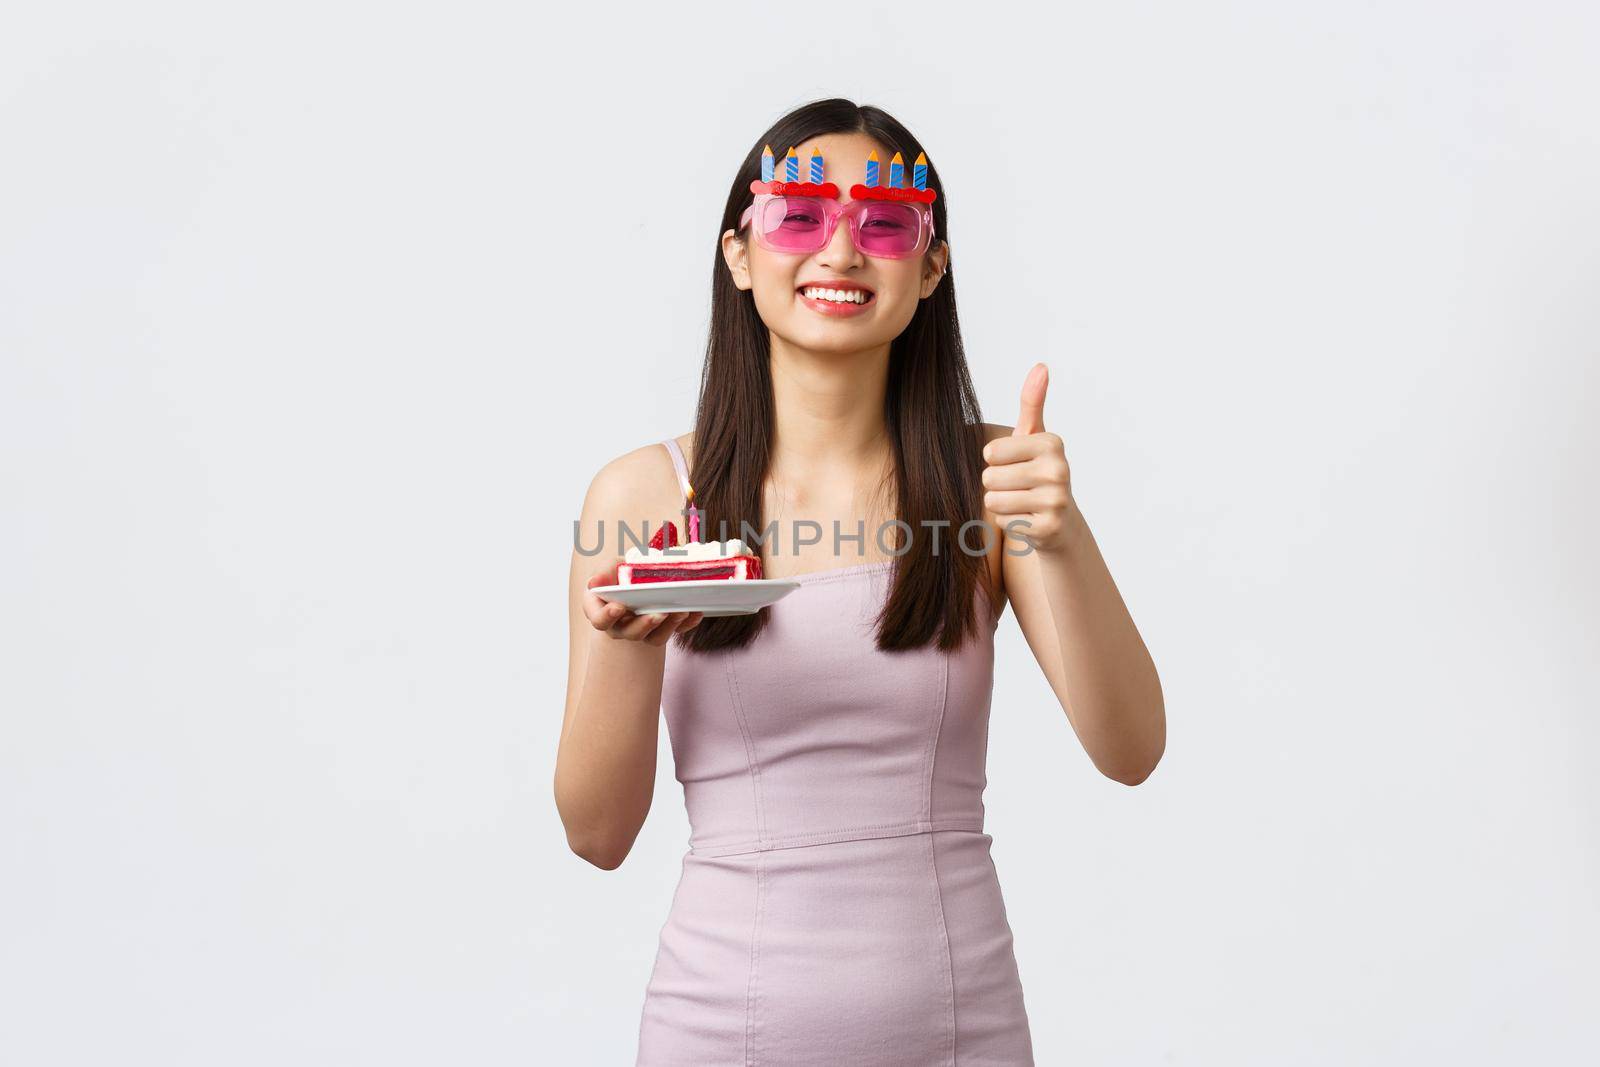 Celebration, party and holidays concept. Joyful smiling asian woman in glasses and dress, show thumbs-up, celebrating own birthday, making wish on b-day cake, white background.